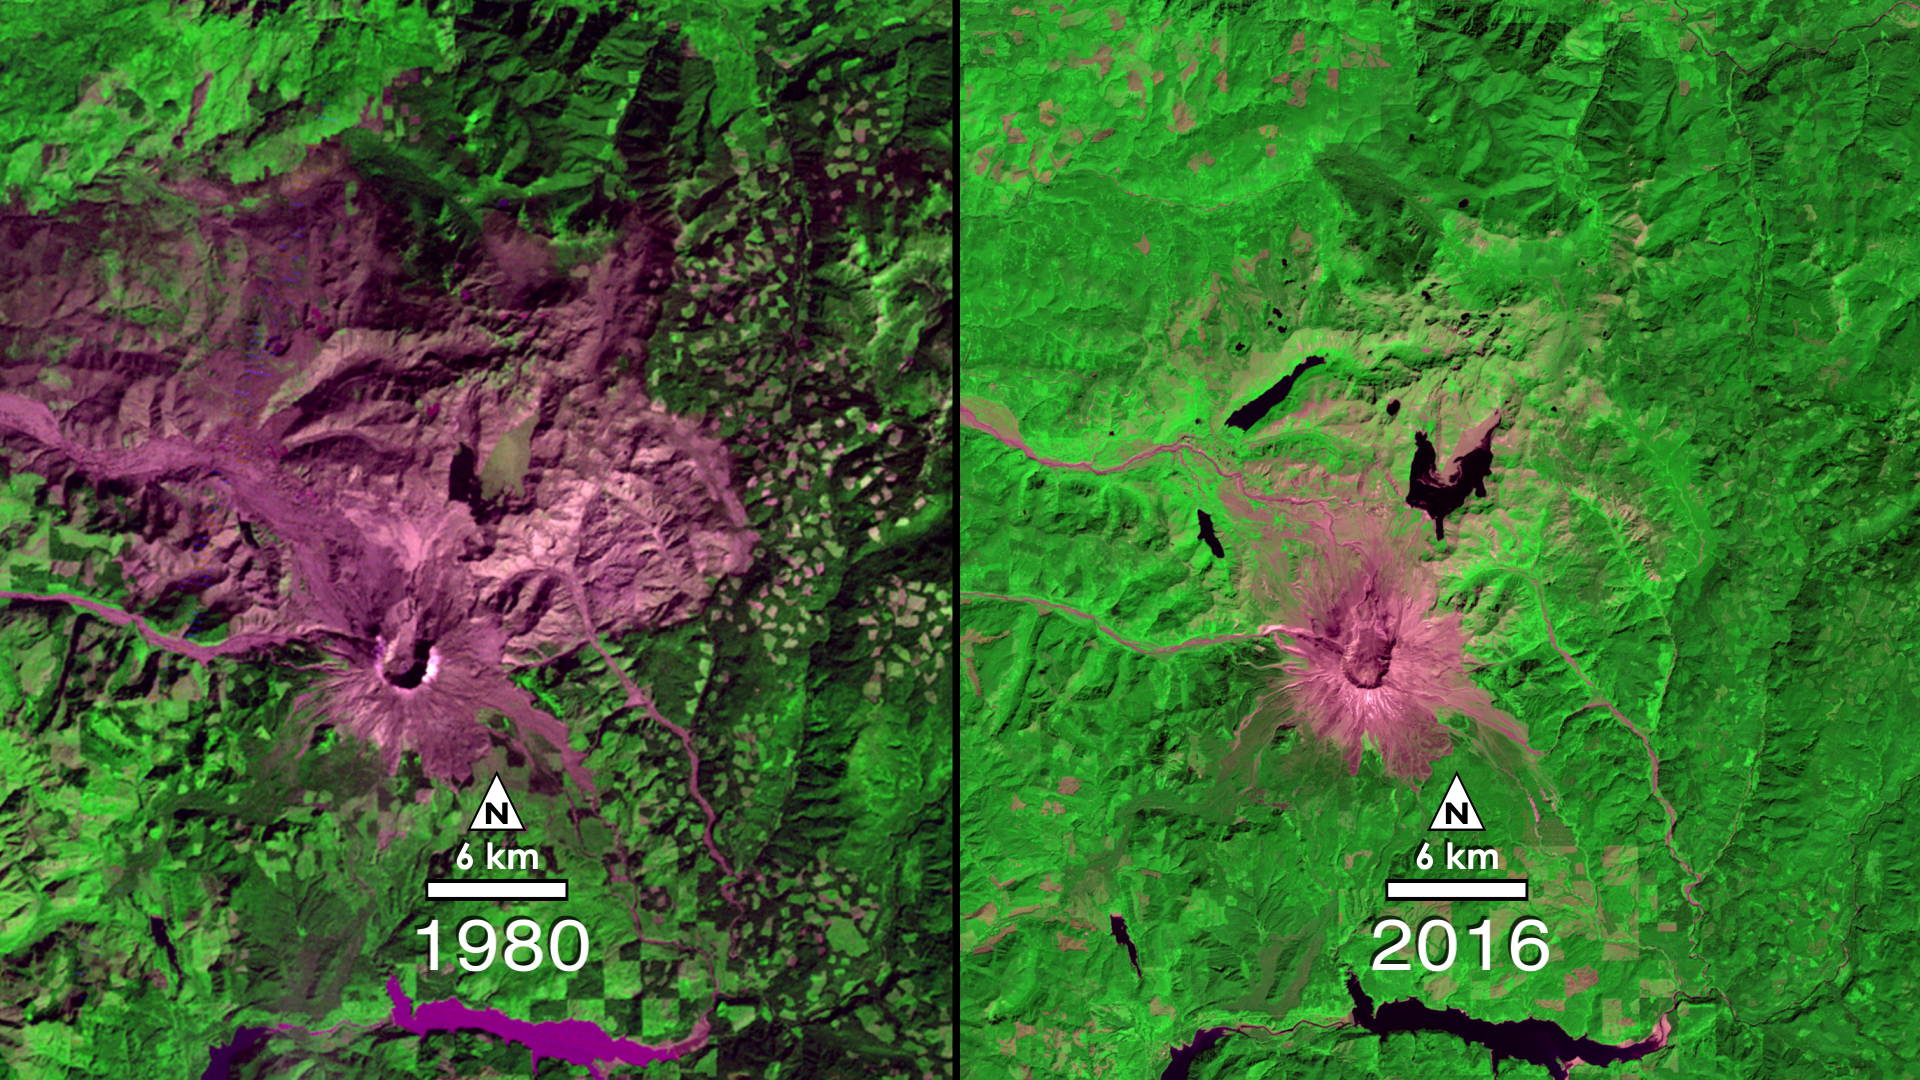 In 1980, Mount St. Helens roared back into major activity with a massive eruption that leveled surrounding forest, blasted away over a thousand feet of the mountain's summit, and claimed 57 human lives.This short video shows the catastrophic eruption - and the amazing recovery of the surrounding ecosystem - through the eyes of the Landsat satellites, which have been imaging our planet for almost forty years. By observing red, near-infrared, and green wavelengths of light reflected off the surface, it is possible to distinguish healthy vegetation (in green) from bare ground (in magenta).Music: Running by Dirk Ehlert [BMI], Guillermo De La Barreda [BMI]Watch this video on the NASA Goddard YouTube channel.